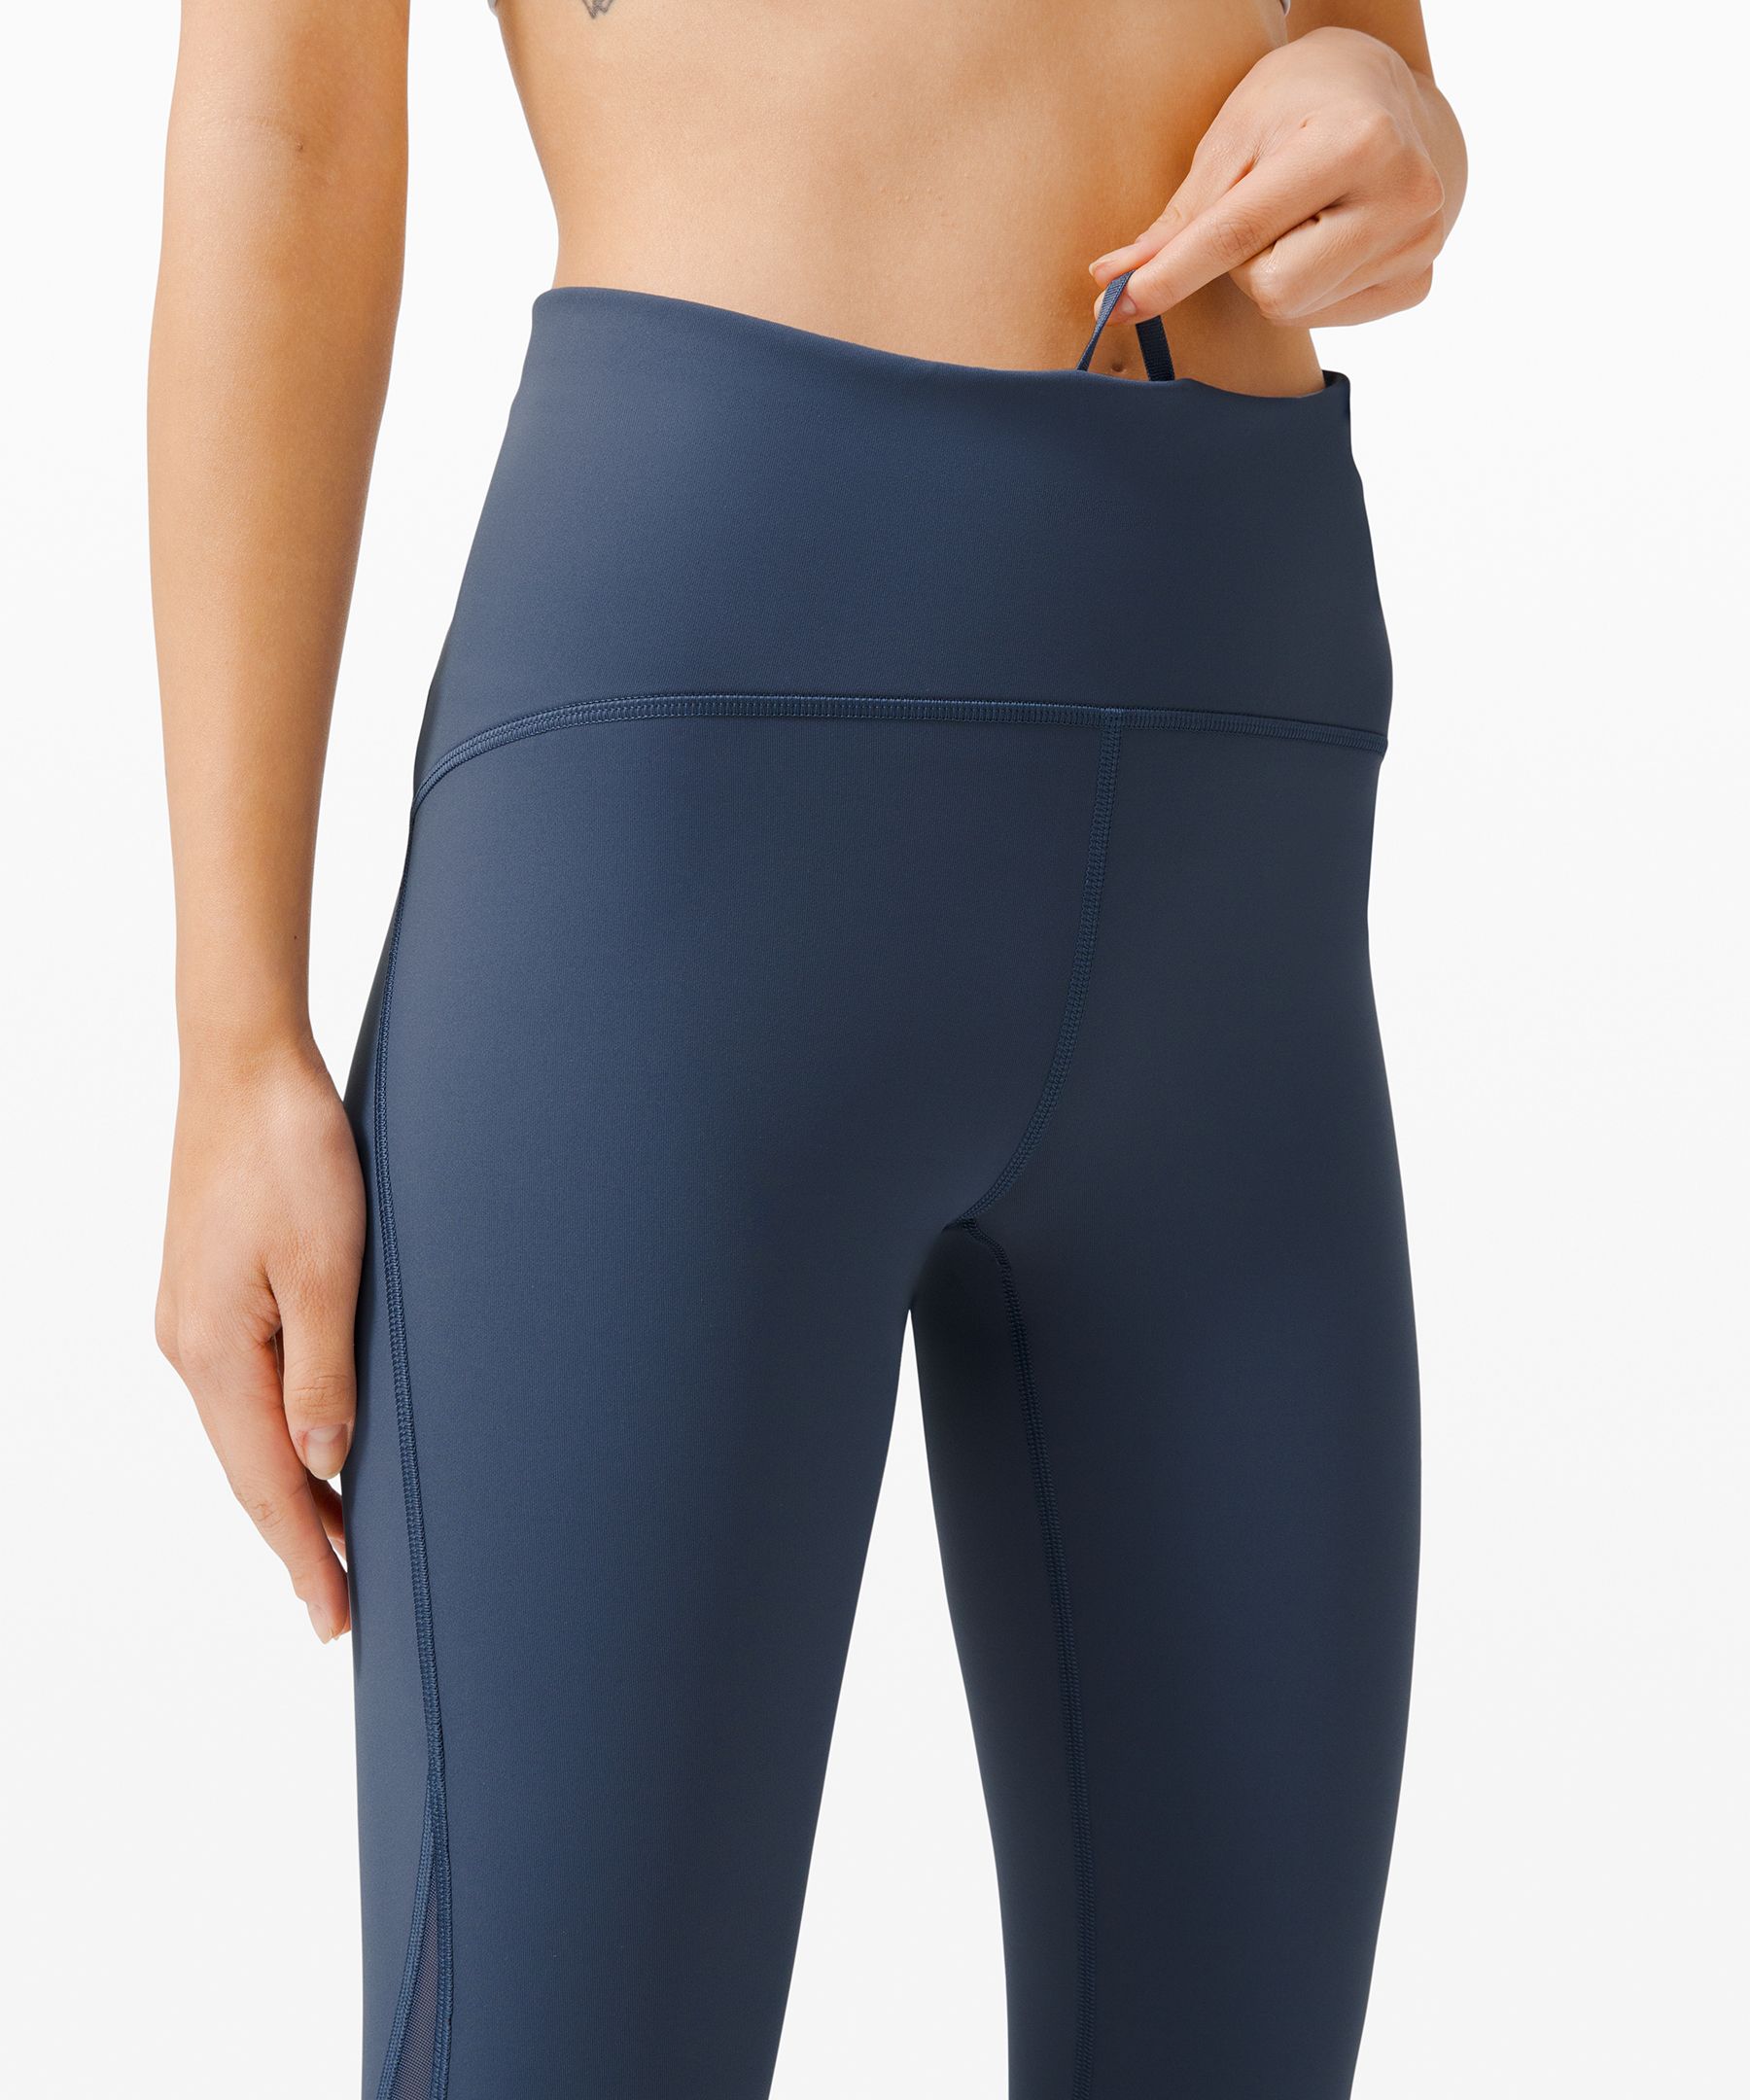 Lululemon Train Times 7/8 Pant Review  International Society of Precision  Agriculture